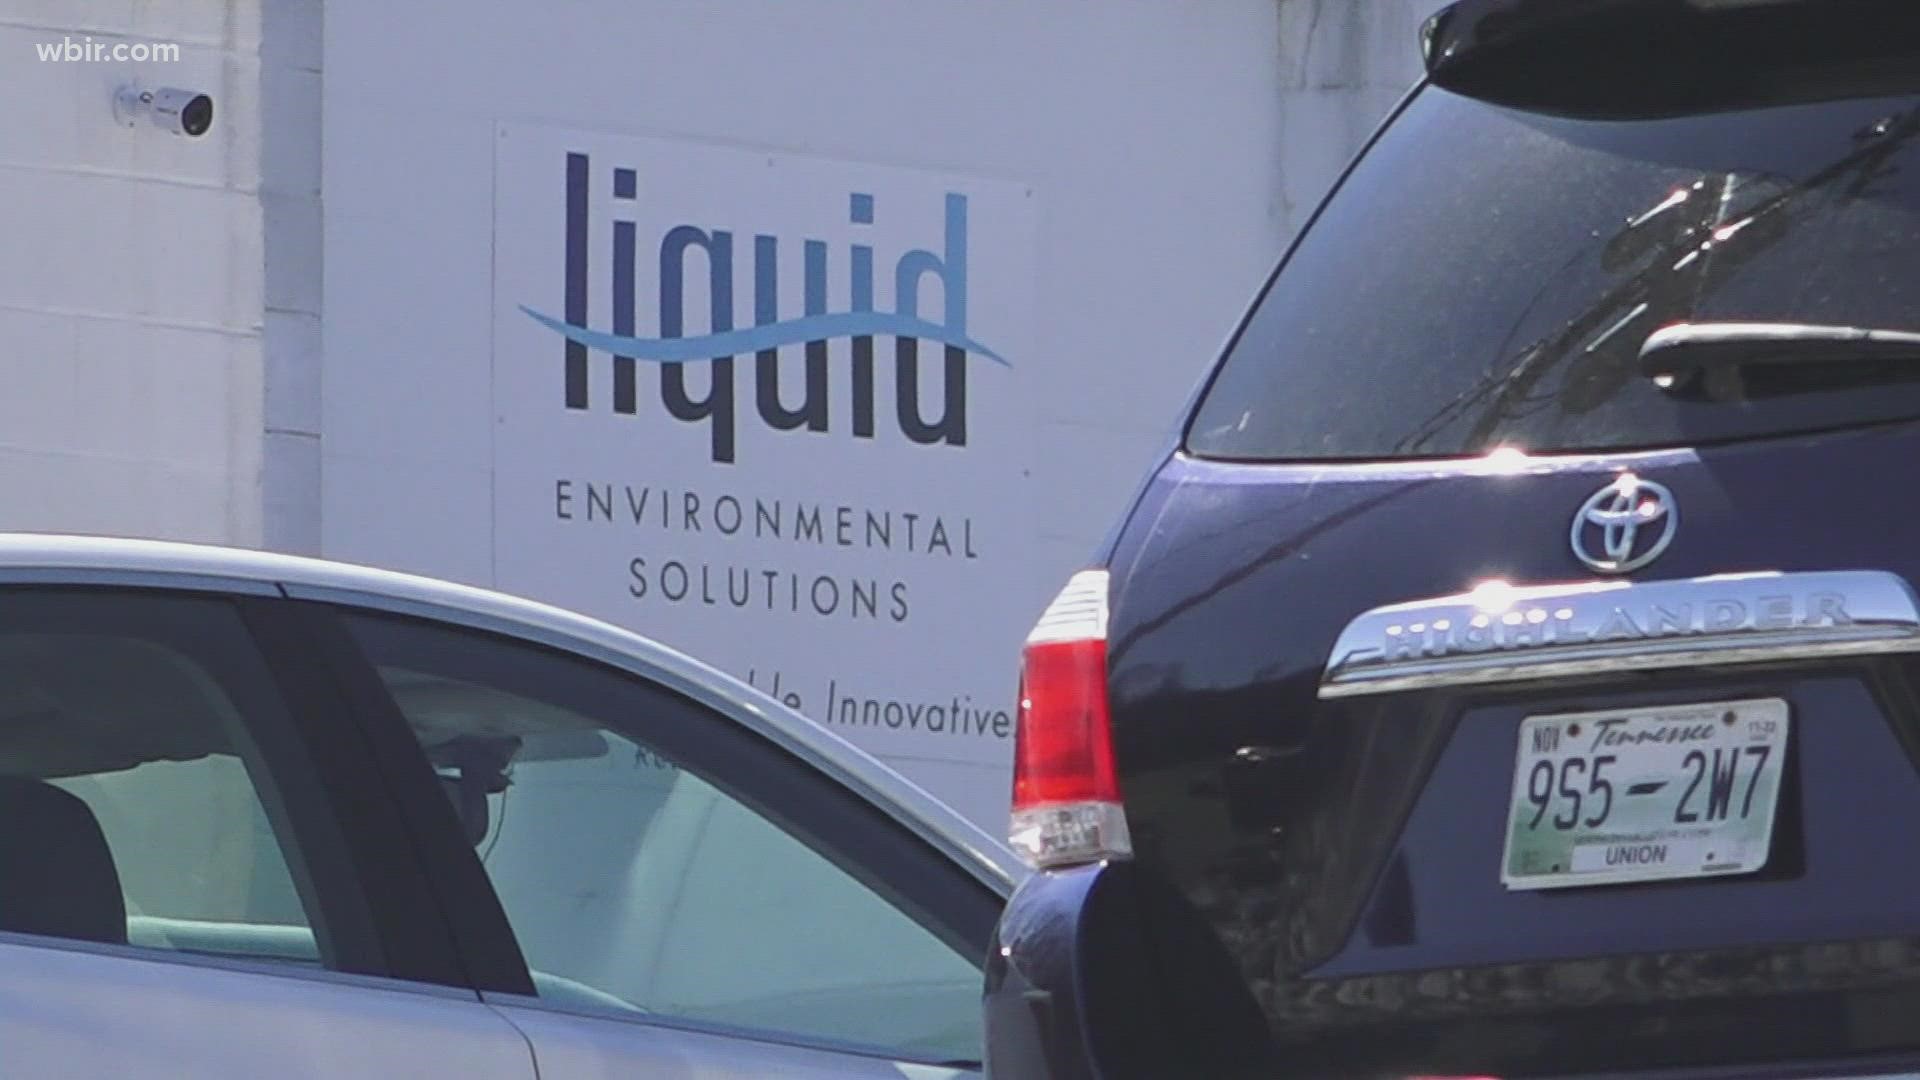 Liquid Environmental Solutions says it provides a vital community service and is committed to minimizing odors from its Parkridge-adjacent facility.